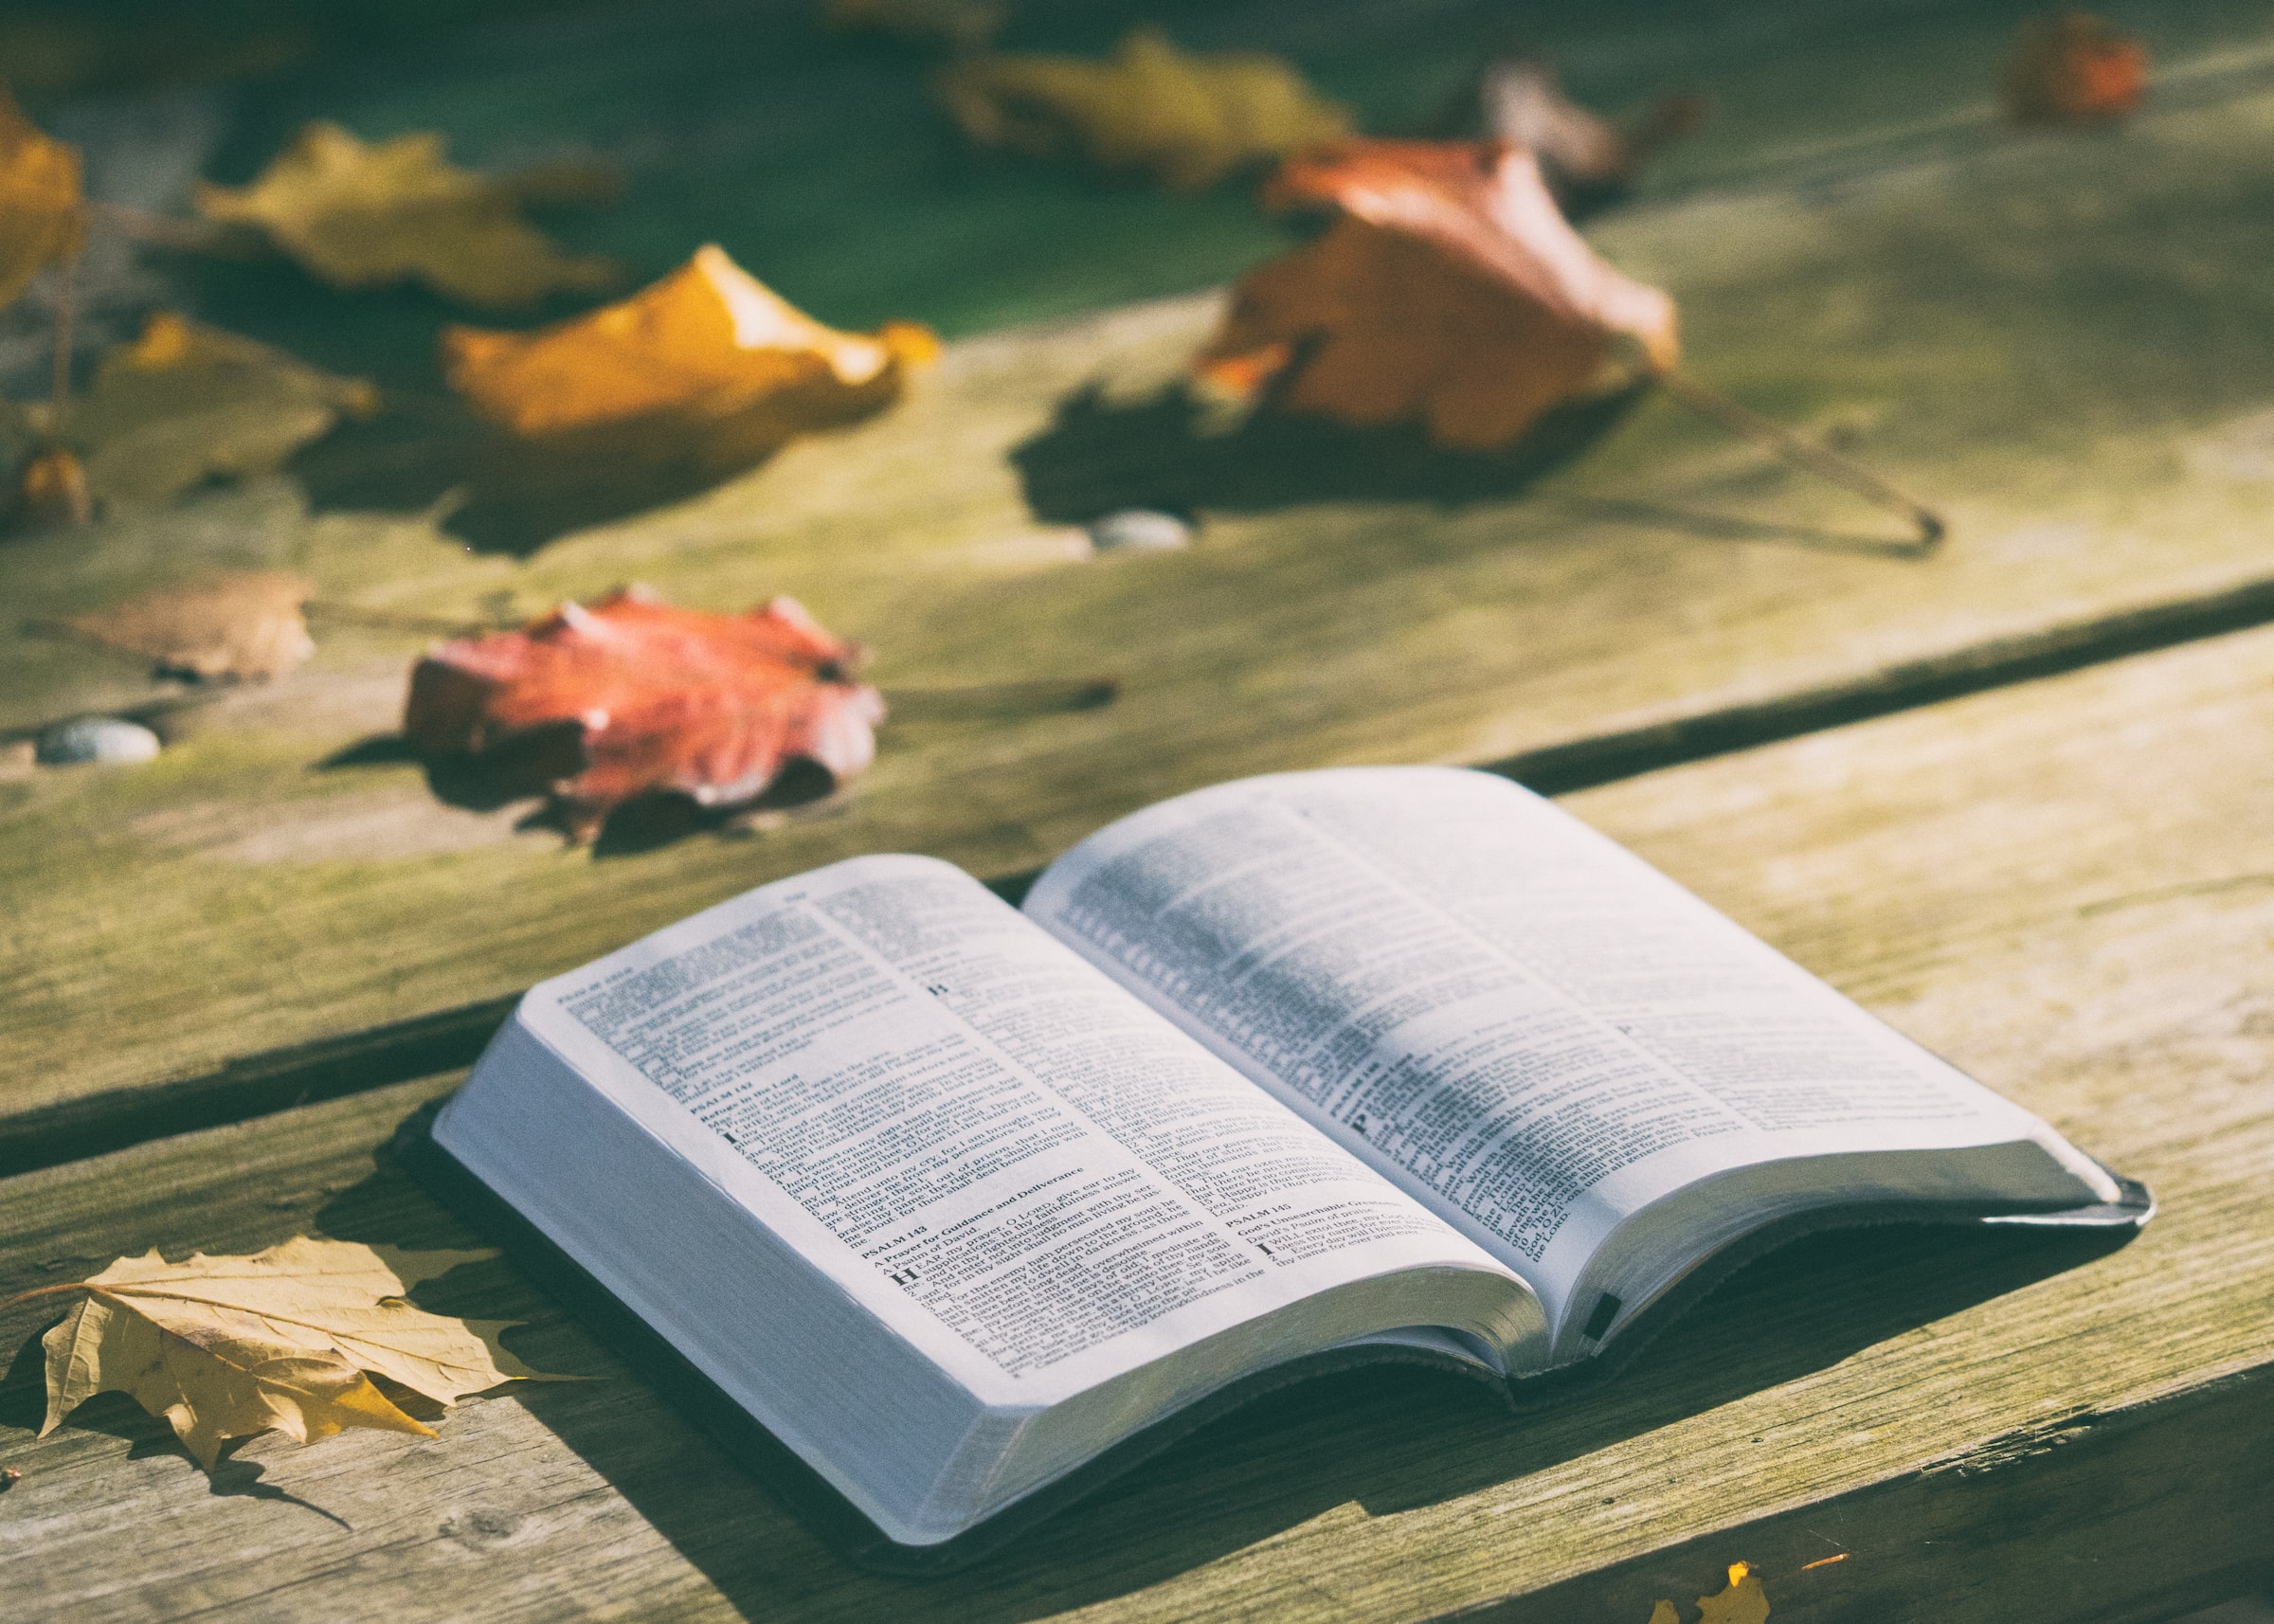 The image shows an open book on an outdoor wooden table, with autumn leaves in the background.